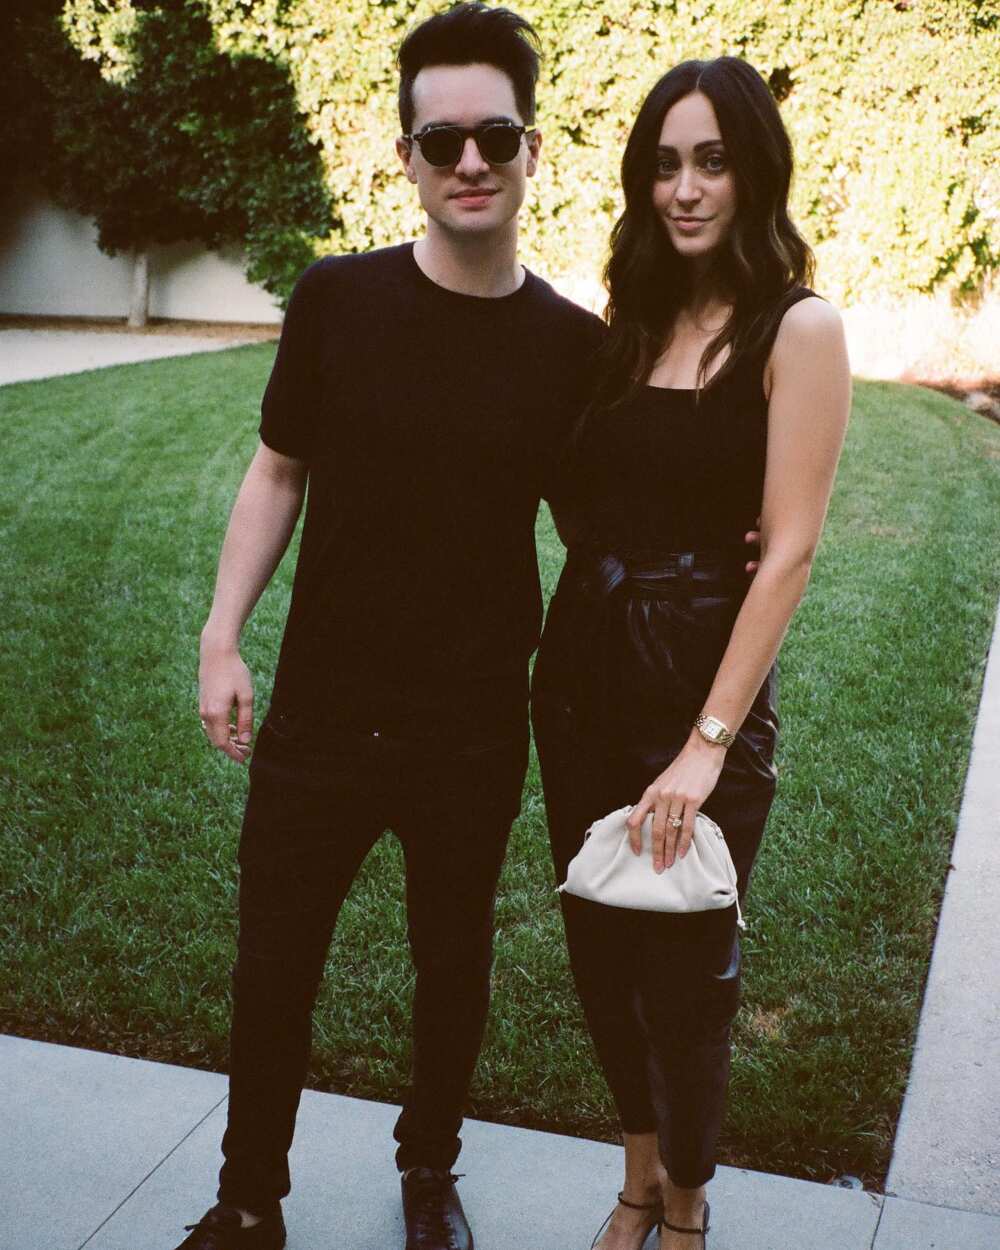 when did Brendon Urie get married